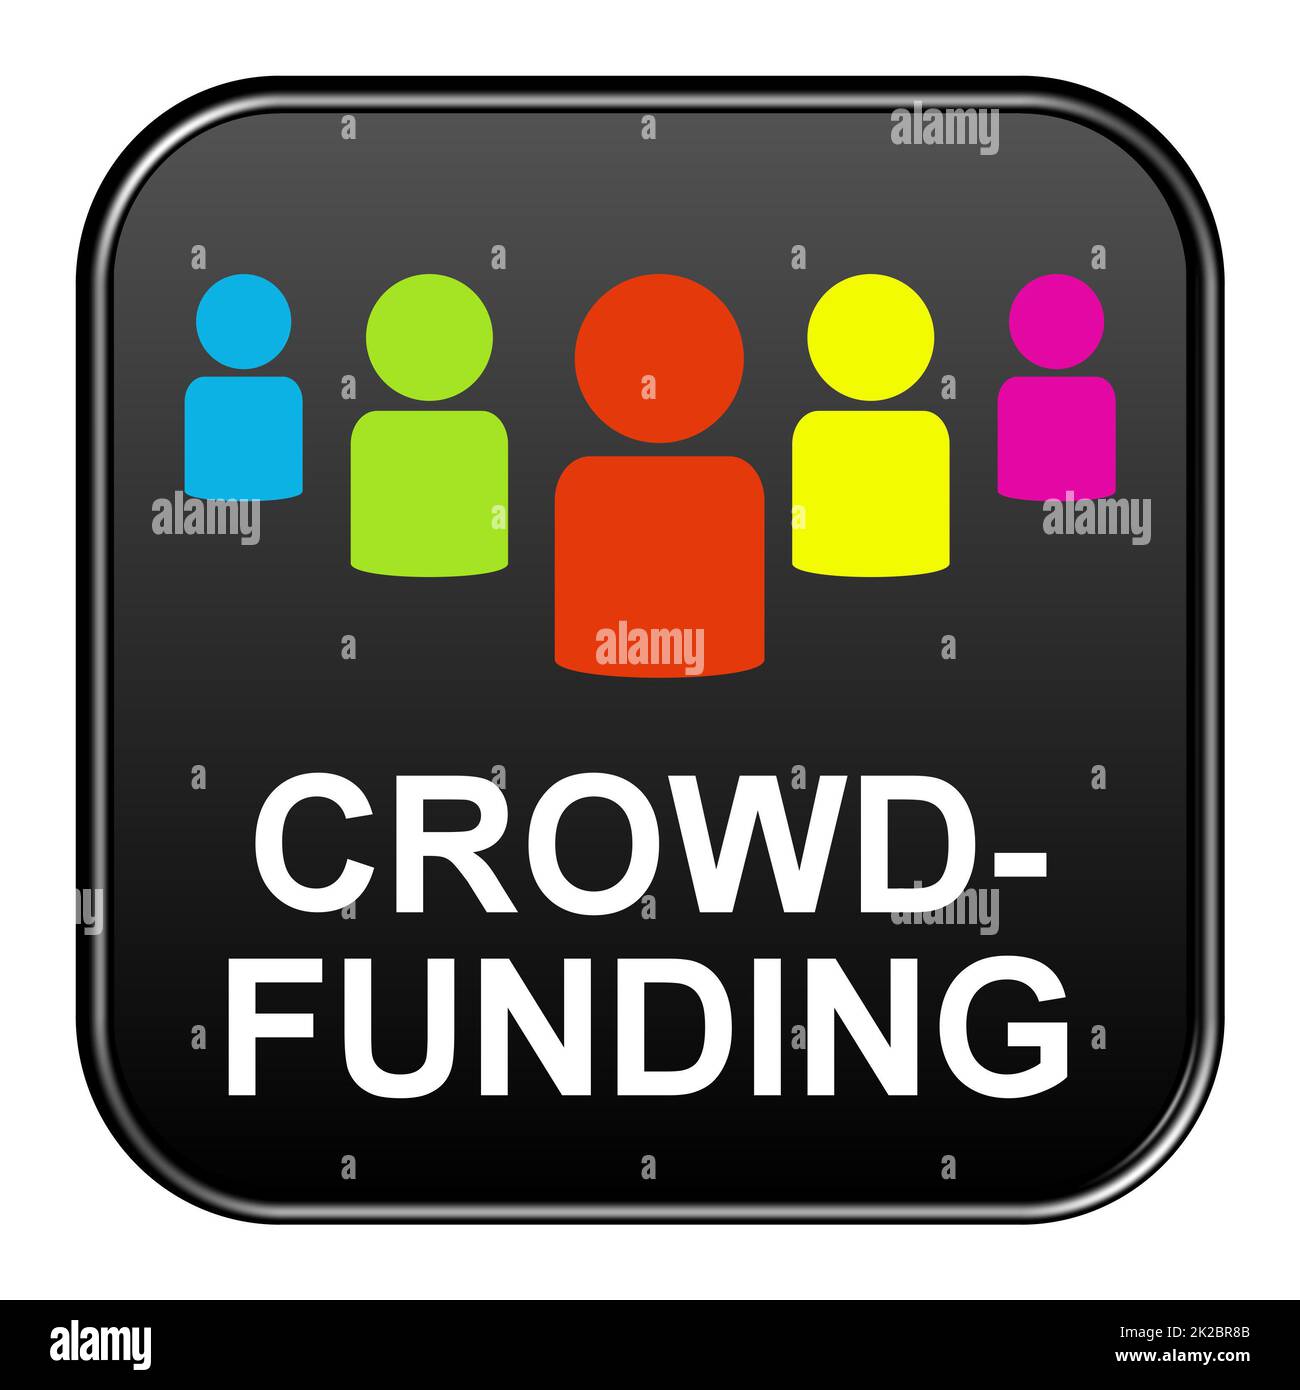 Crowdfunding - Black Button with tick icon Stock Photo